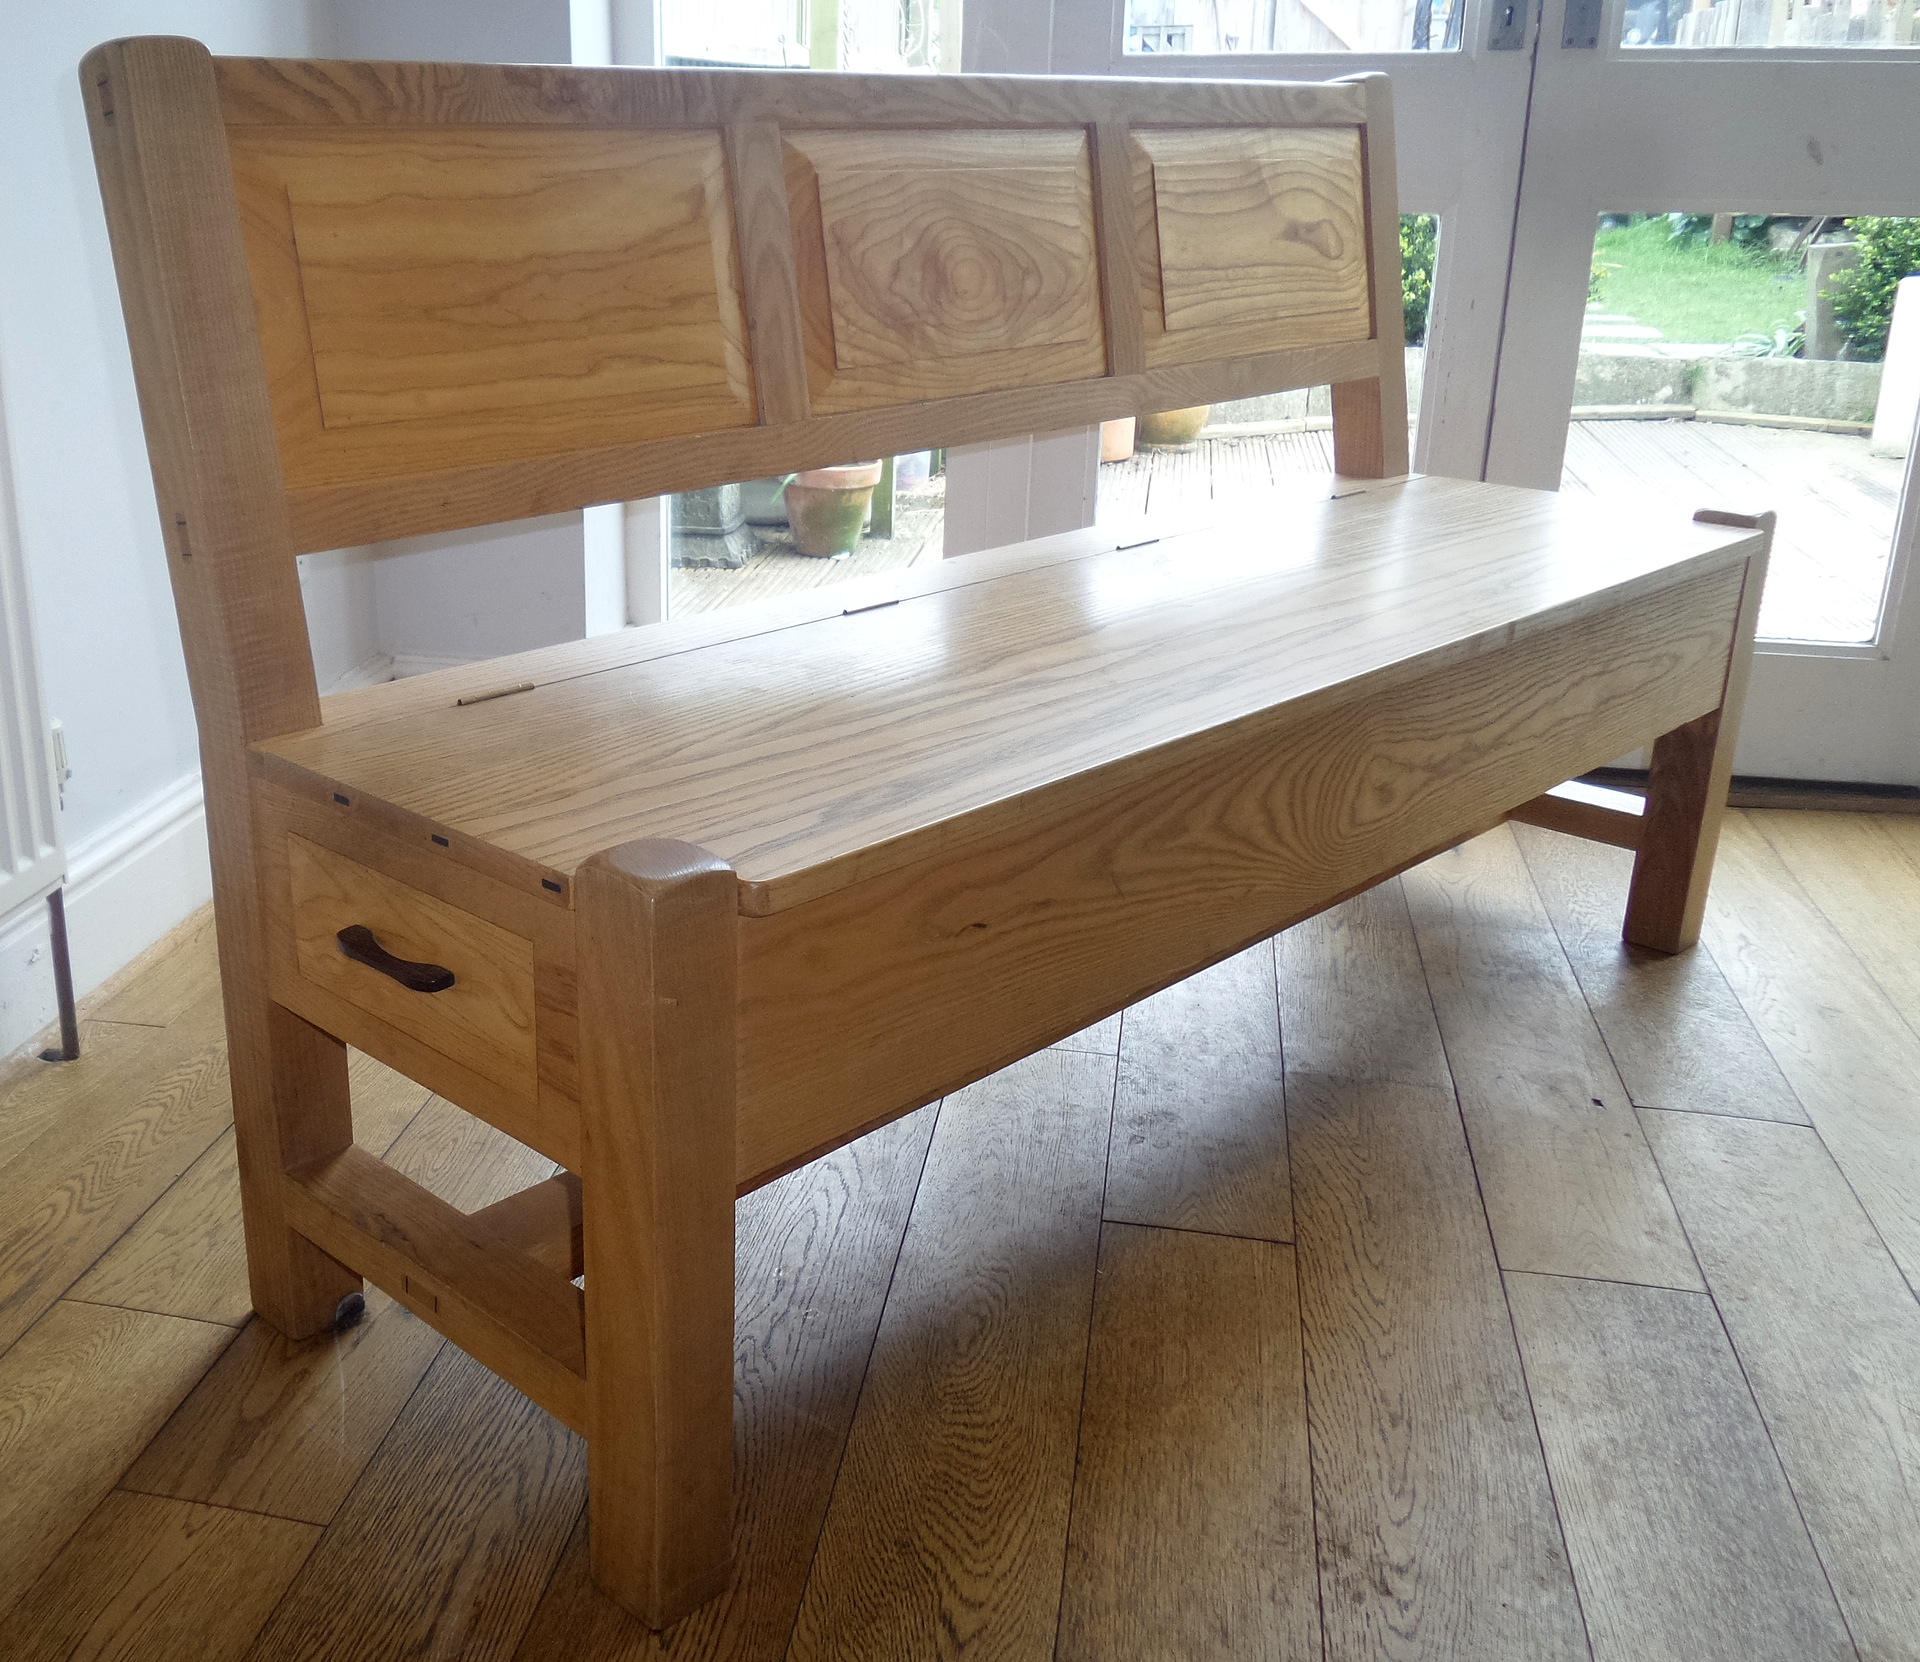 Bespoke Bench with Drawers